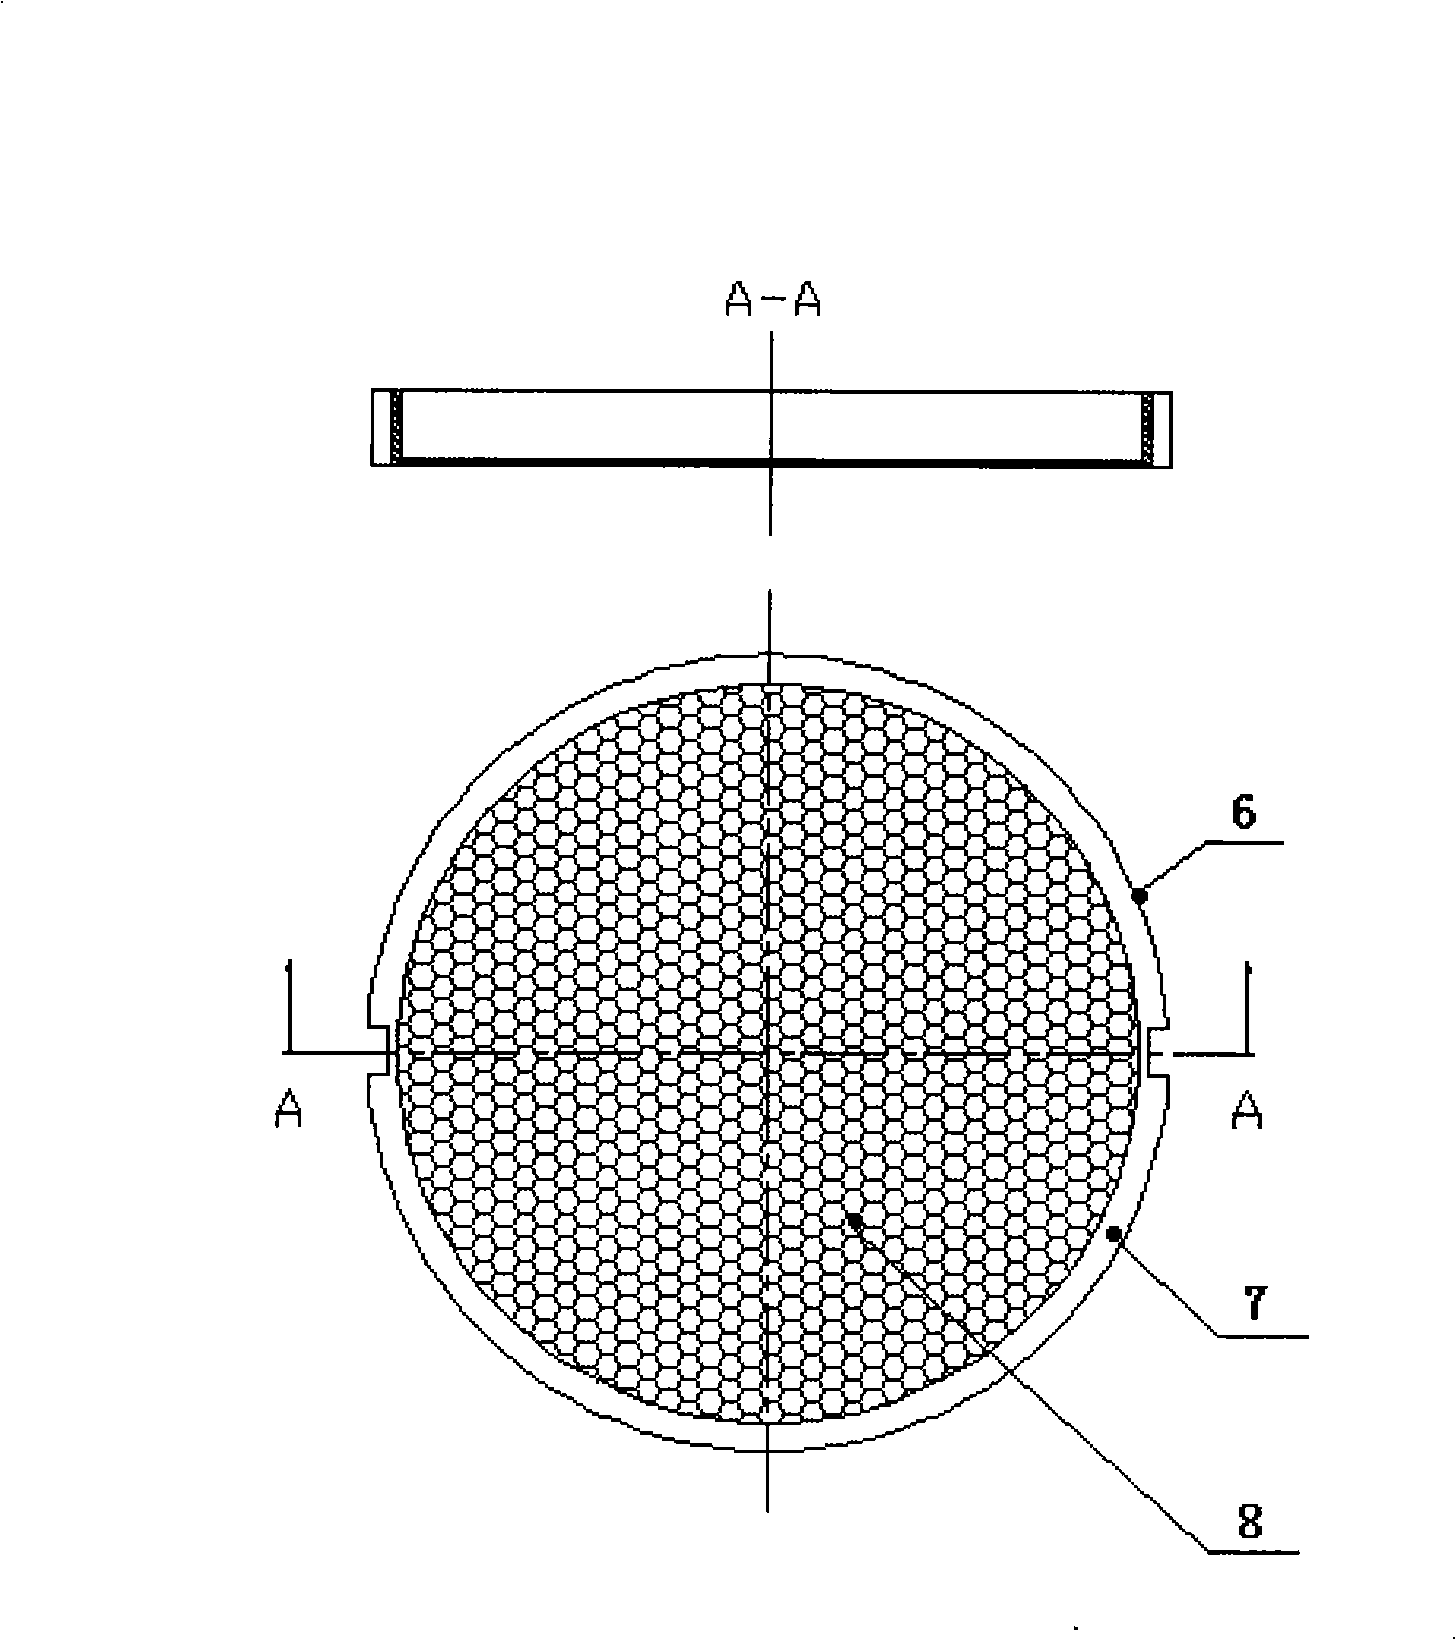 Reactor pressure vessel material irradiation control sample well type storing device